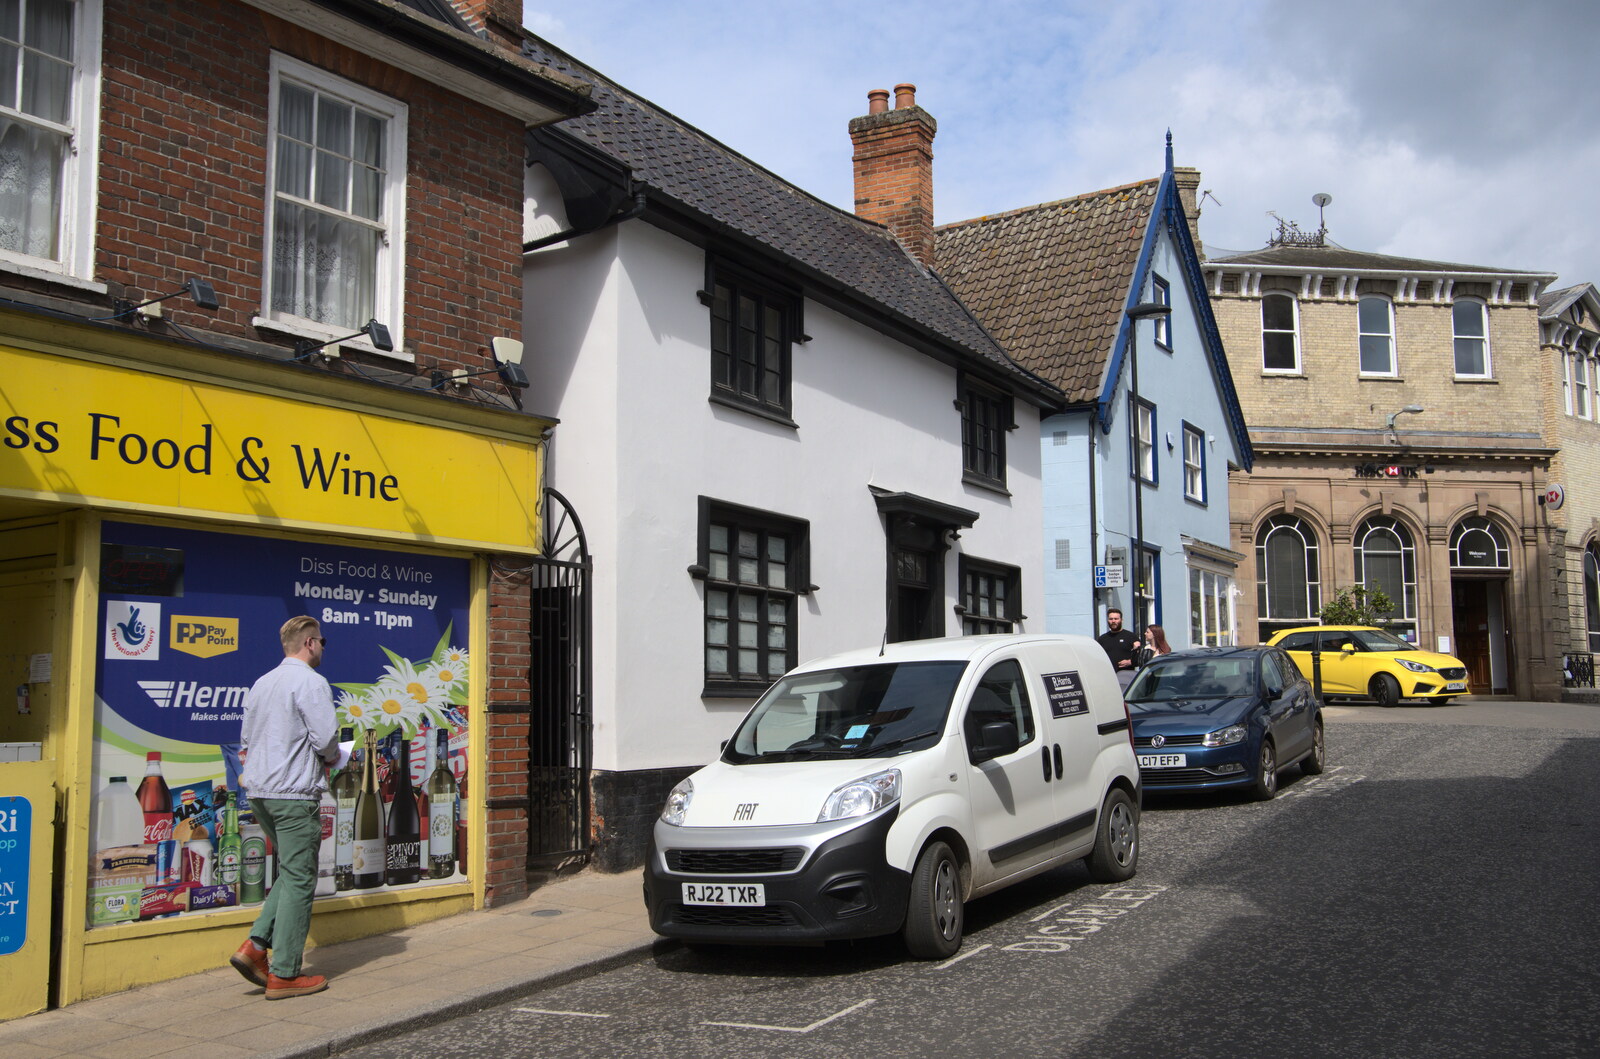 The old White Horse is now an anonymous house from The Lost Pubs of Diss, Norfolk - 26th April 2023